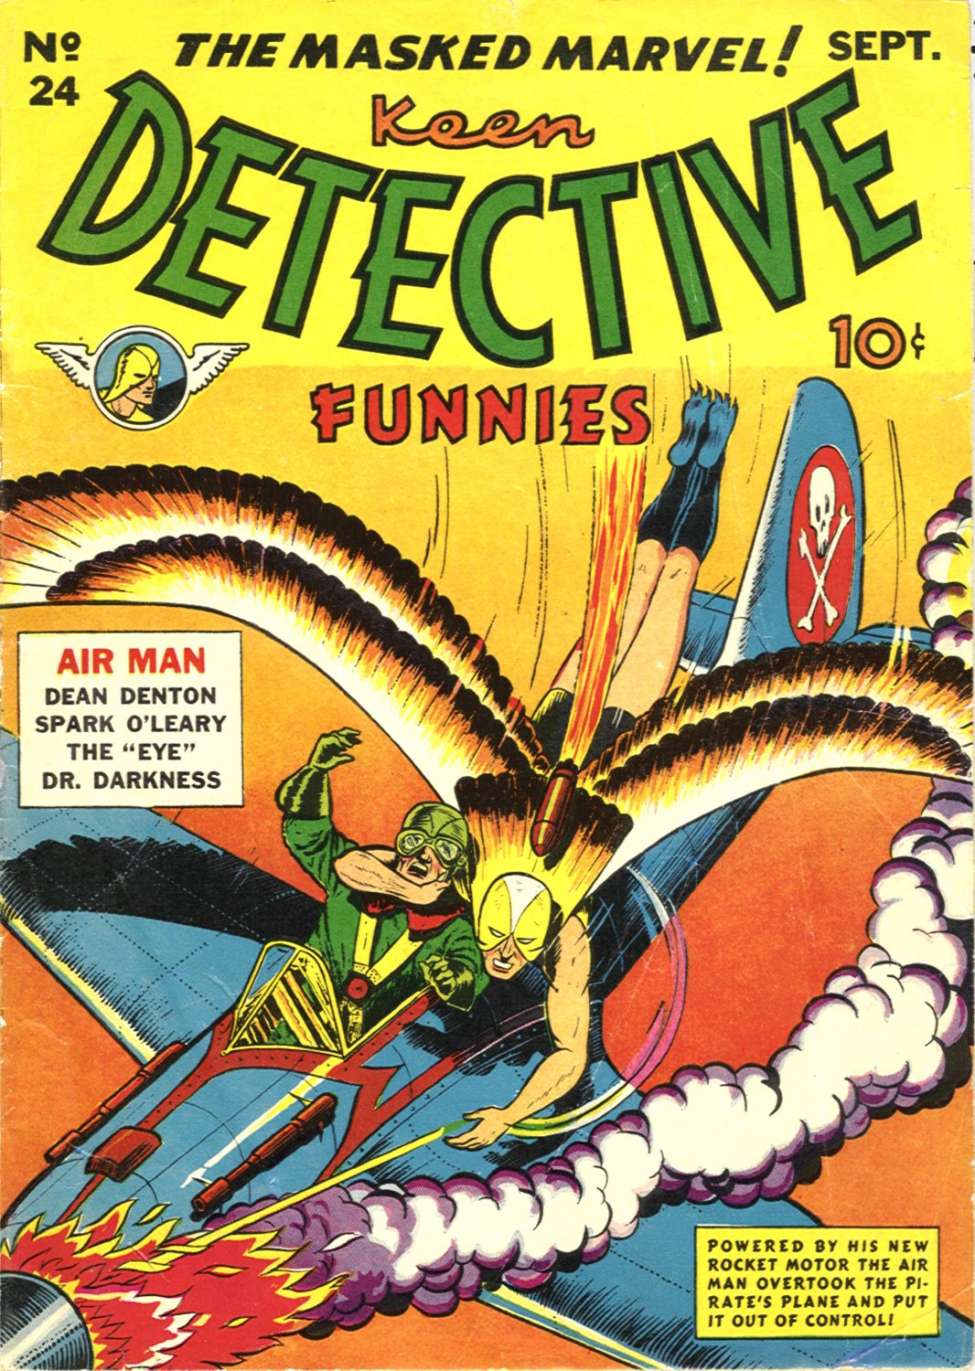 Comic Book Cover For Keen Detective Funnies 24